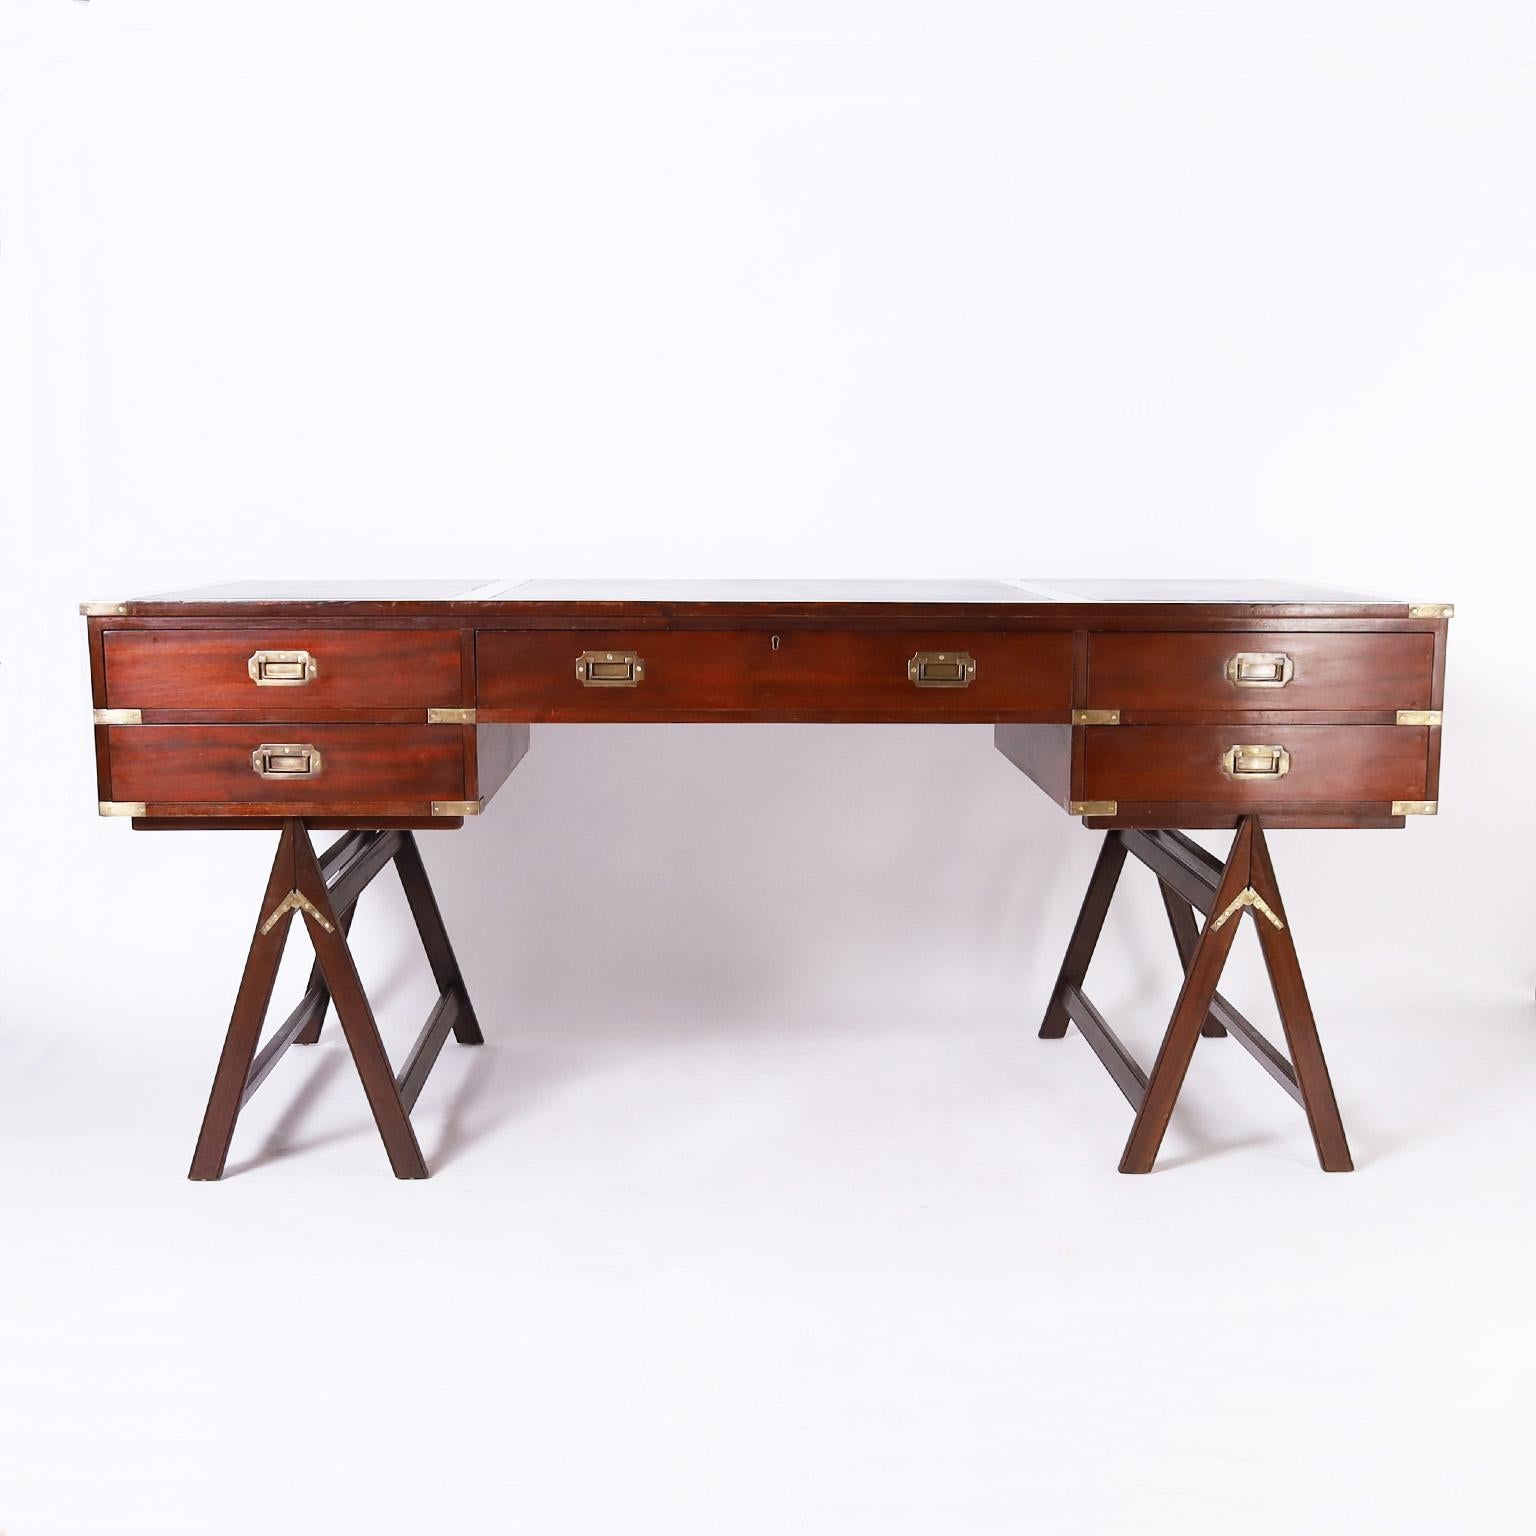 Handsome mid-century campaign style desk crafted in mahogany with a three panel black tooled leather top on a case with five drawers with brass campaign hardware on folding sawhorse style legs.